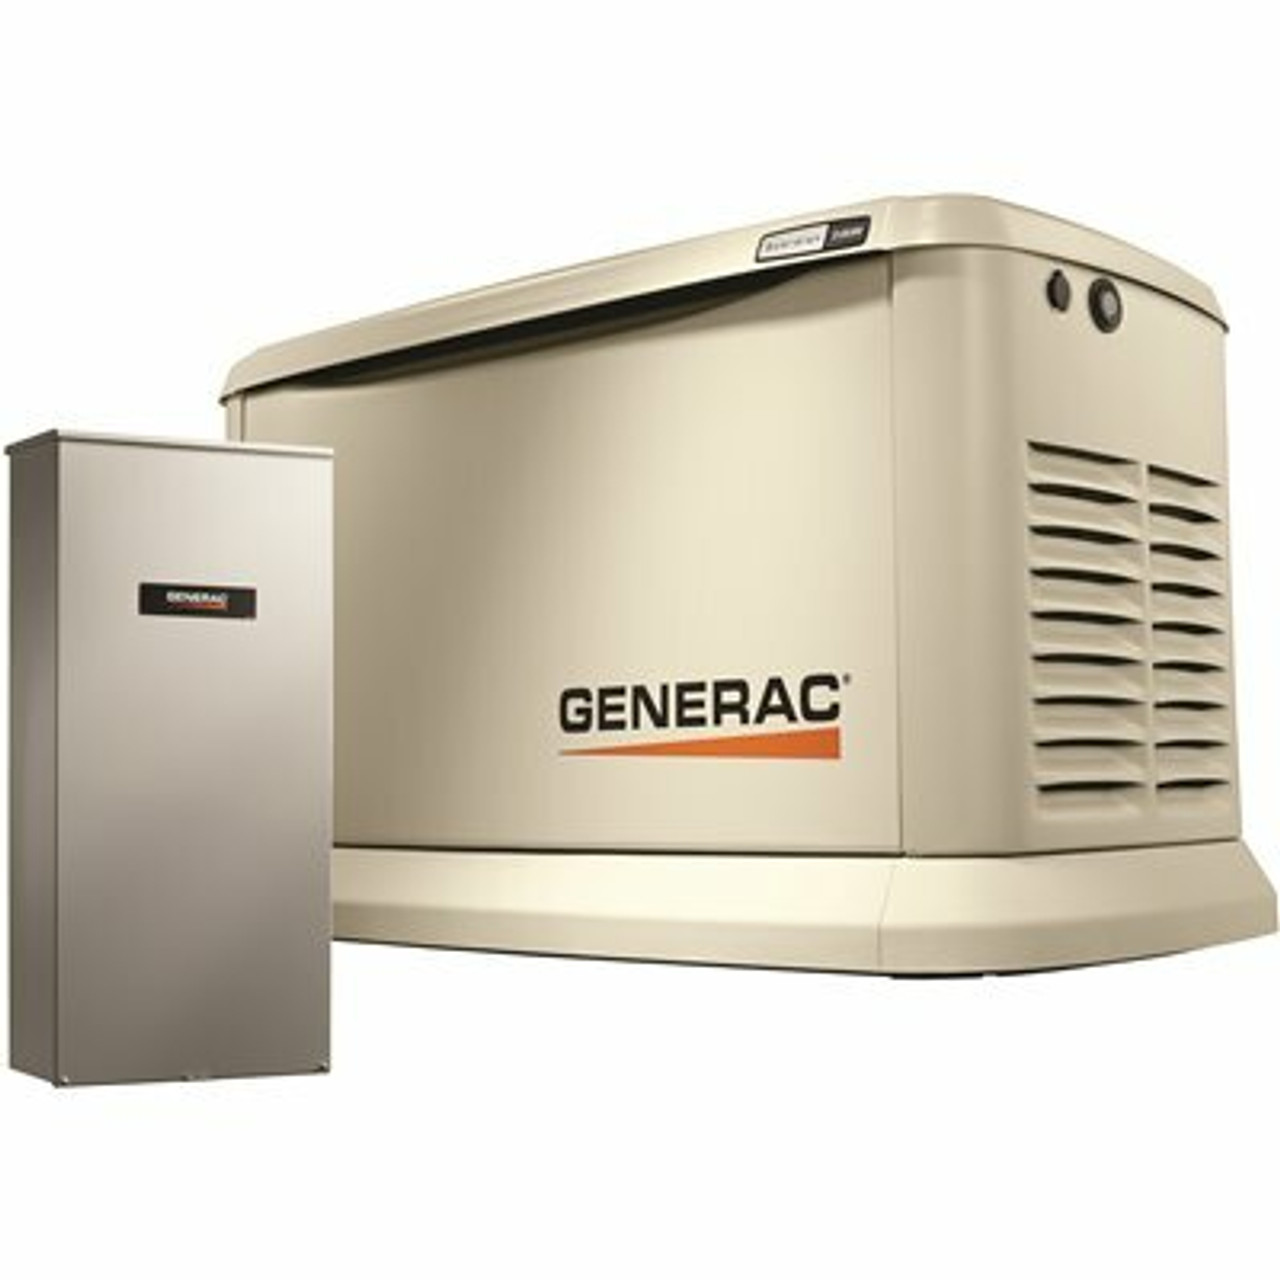 Generac Guardian 24,000-Watt (Lp)/21,000-Watt (Ng) Air-Cooled Whole House Generator With Wi-Fi And 200-Amp Transfer Switch